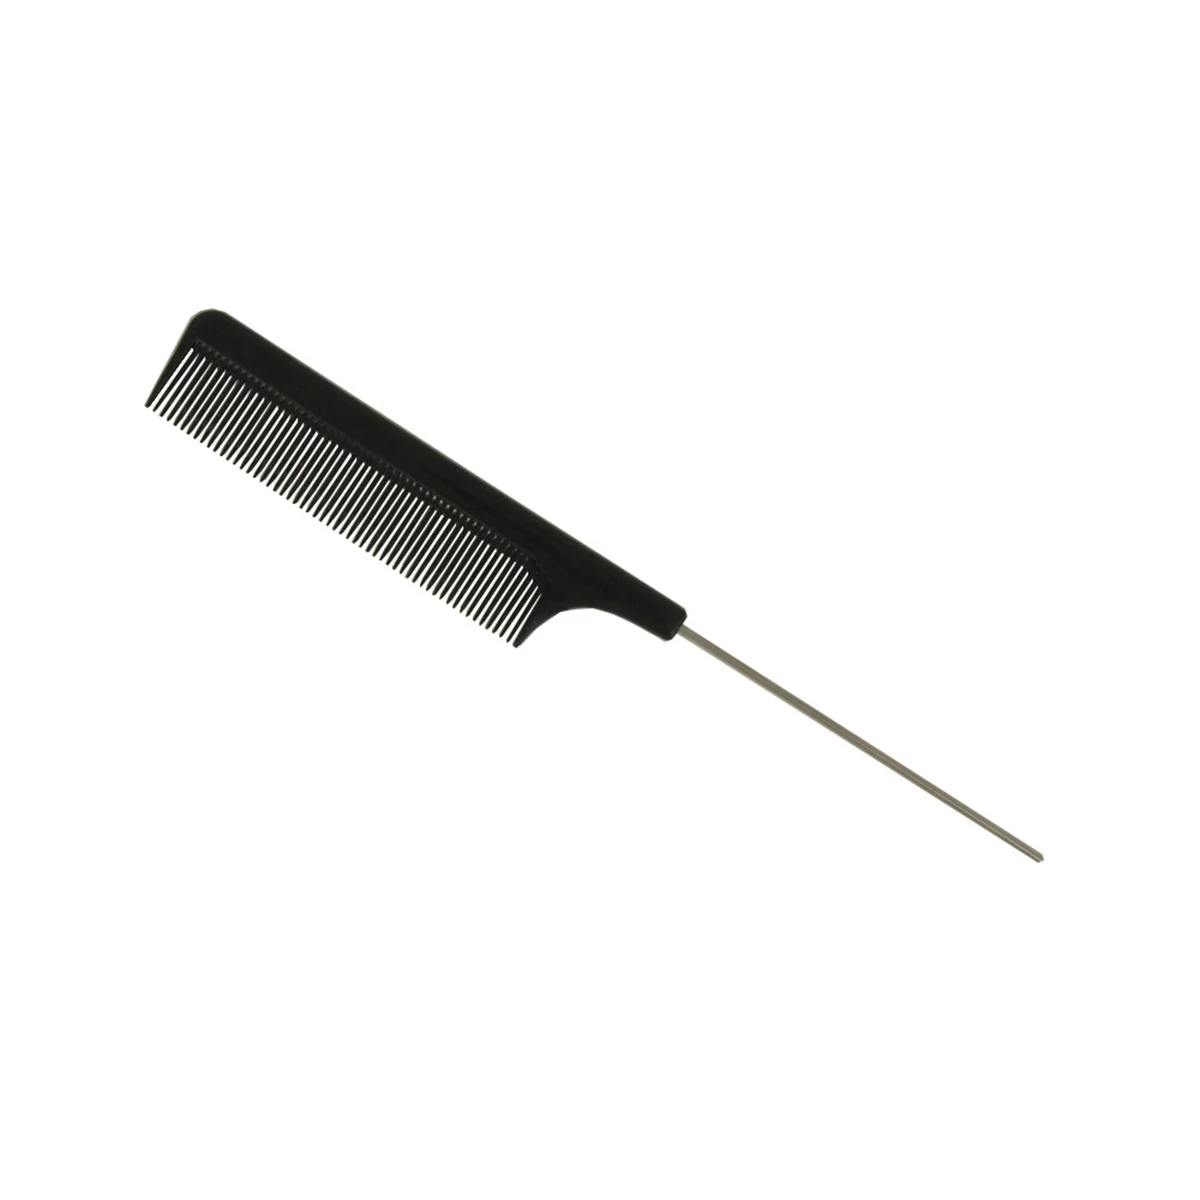 

Comb Rat Tail Hairbrush Salon Metal Combs Heat Handle Free Static Fluffing Fiber Hair Resistant Barber Professional Rattail Home